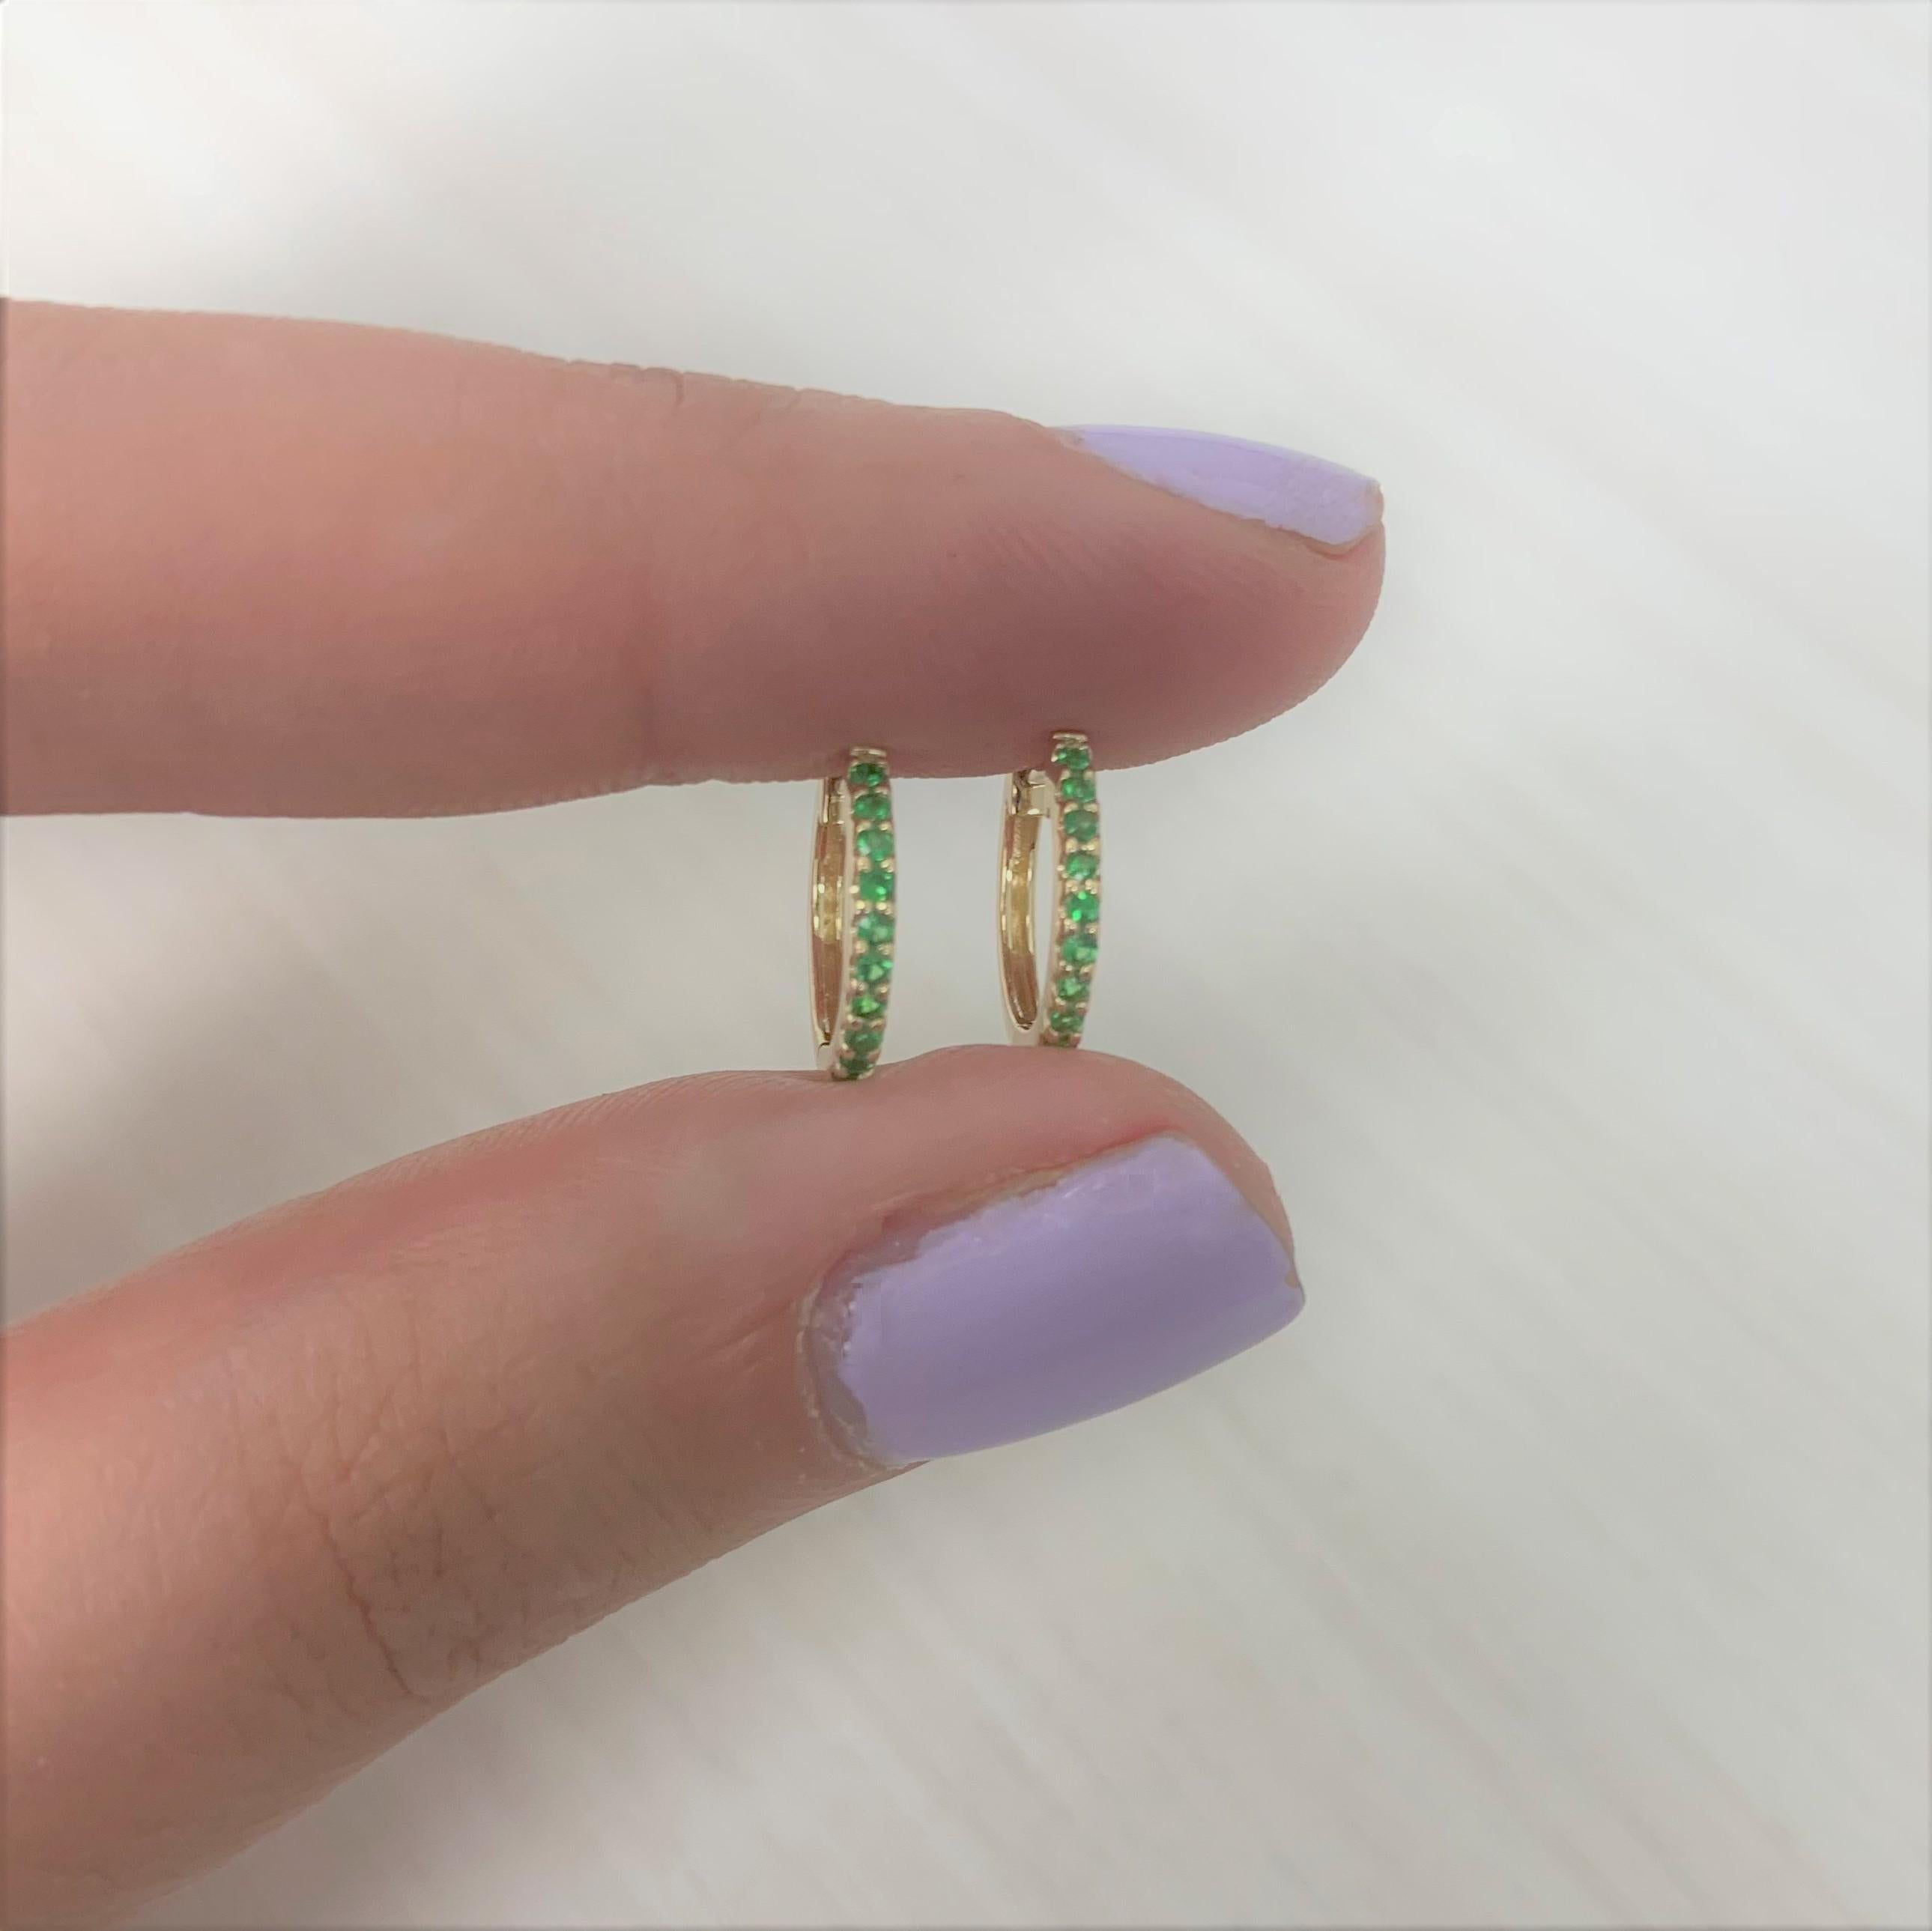 Adorn yourself or gift to a friend these colorful and fun Green Emerald small huggy hoop earrings featuring approximately 0.18 ct. of green emerald. Lever back closure. Super cute for a second piercing.
-14K Yellow Gold
-0.18 ct. Green